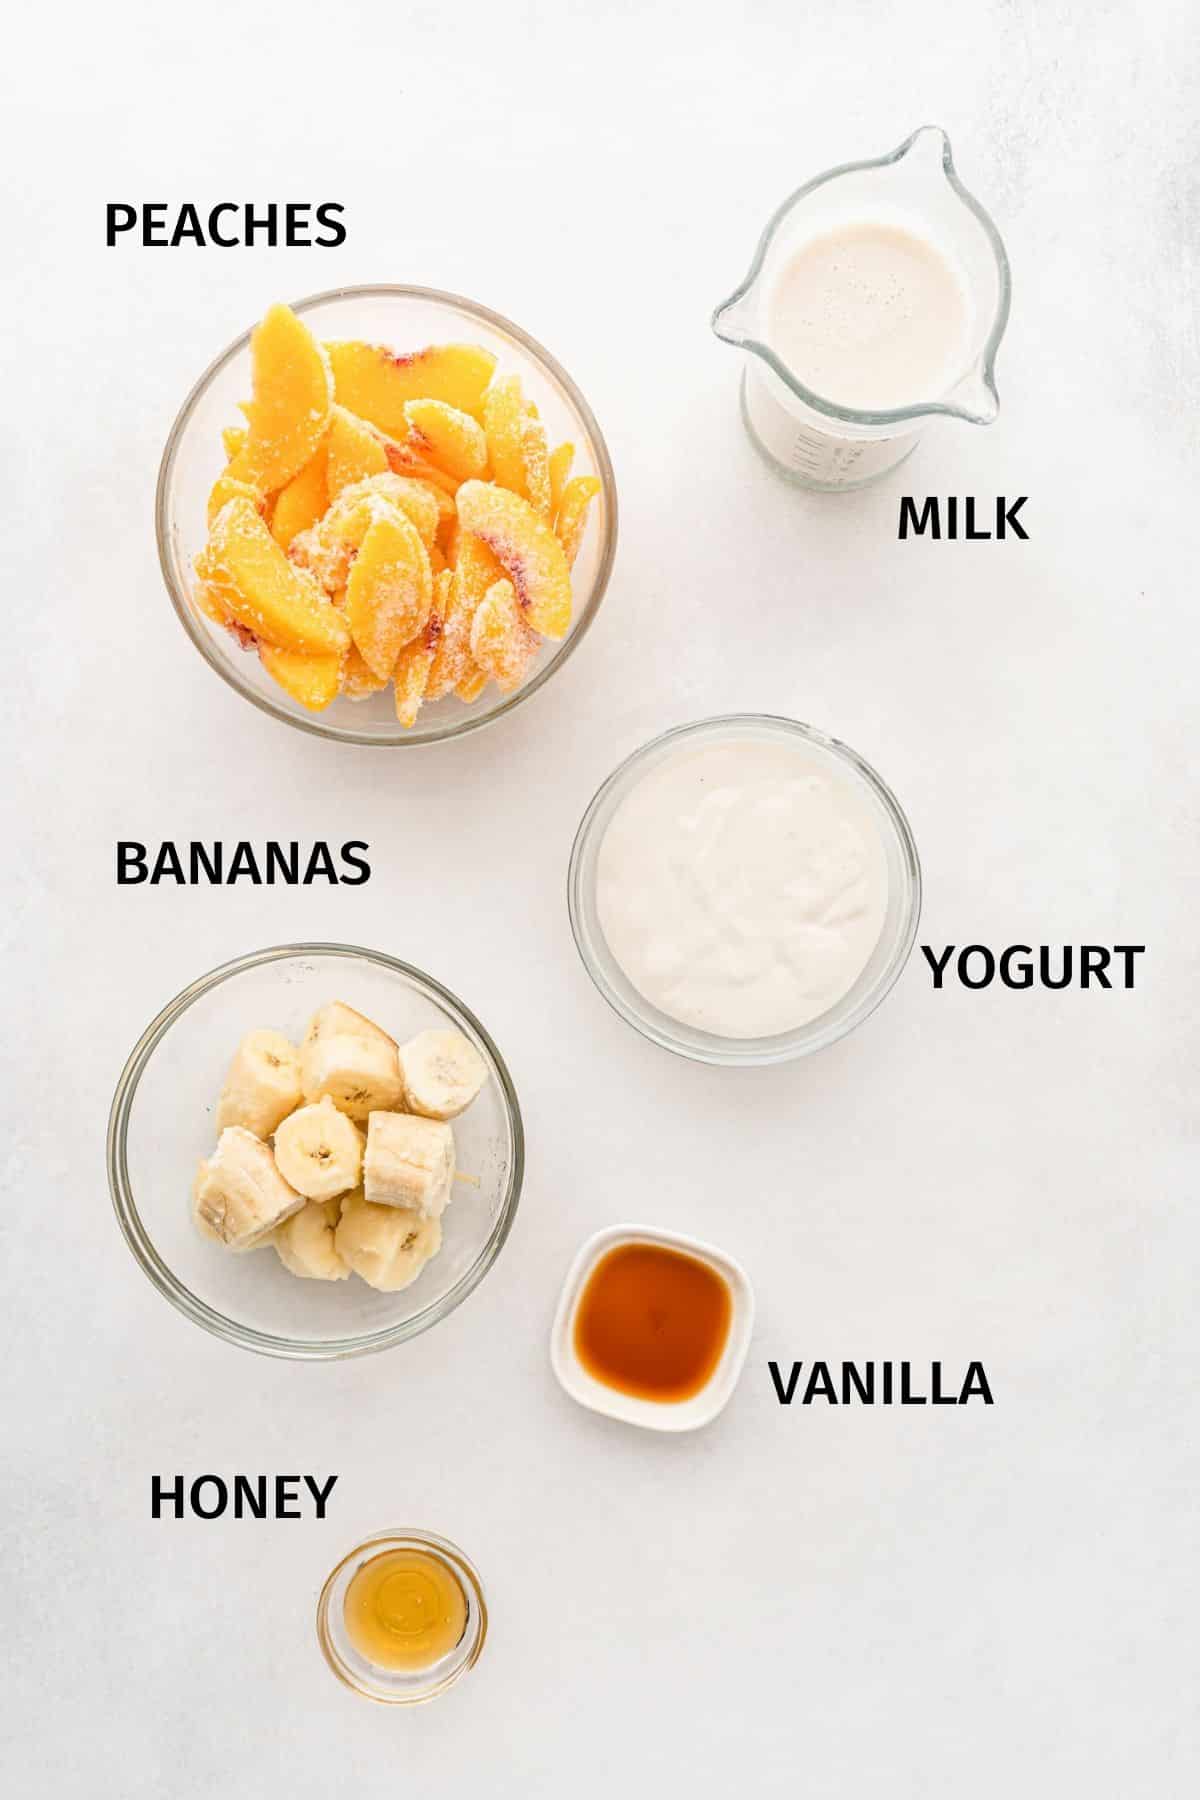 Ingredients for a banana peach smoothie in small bowls on a white surface.